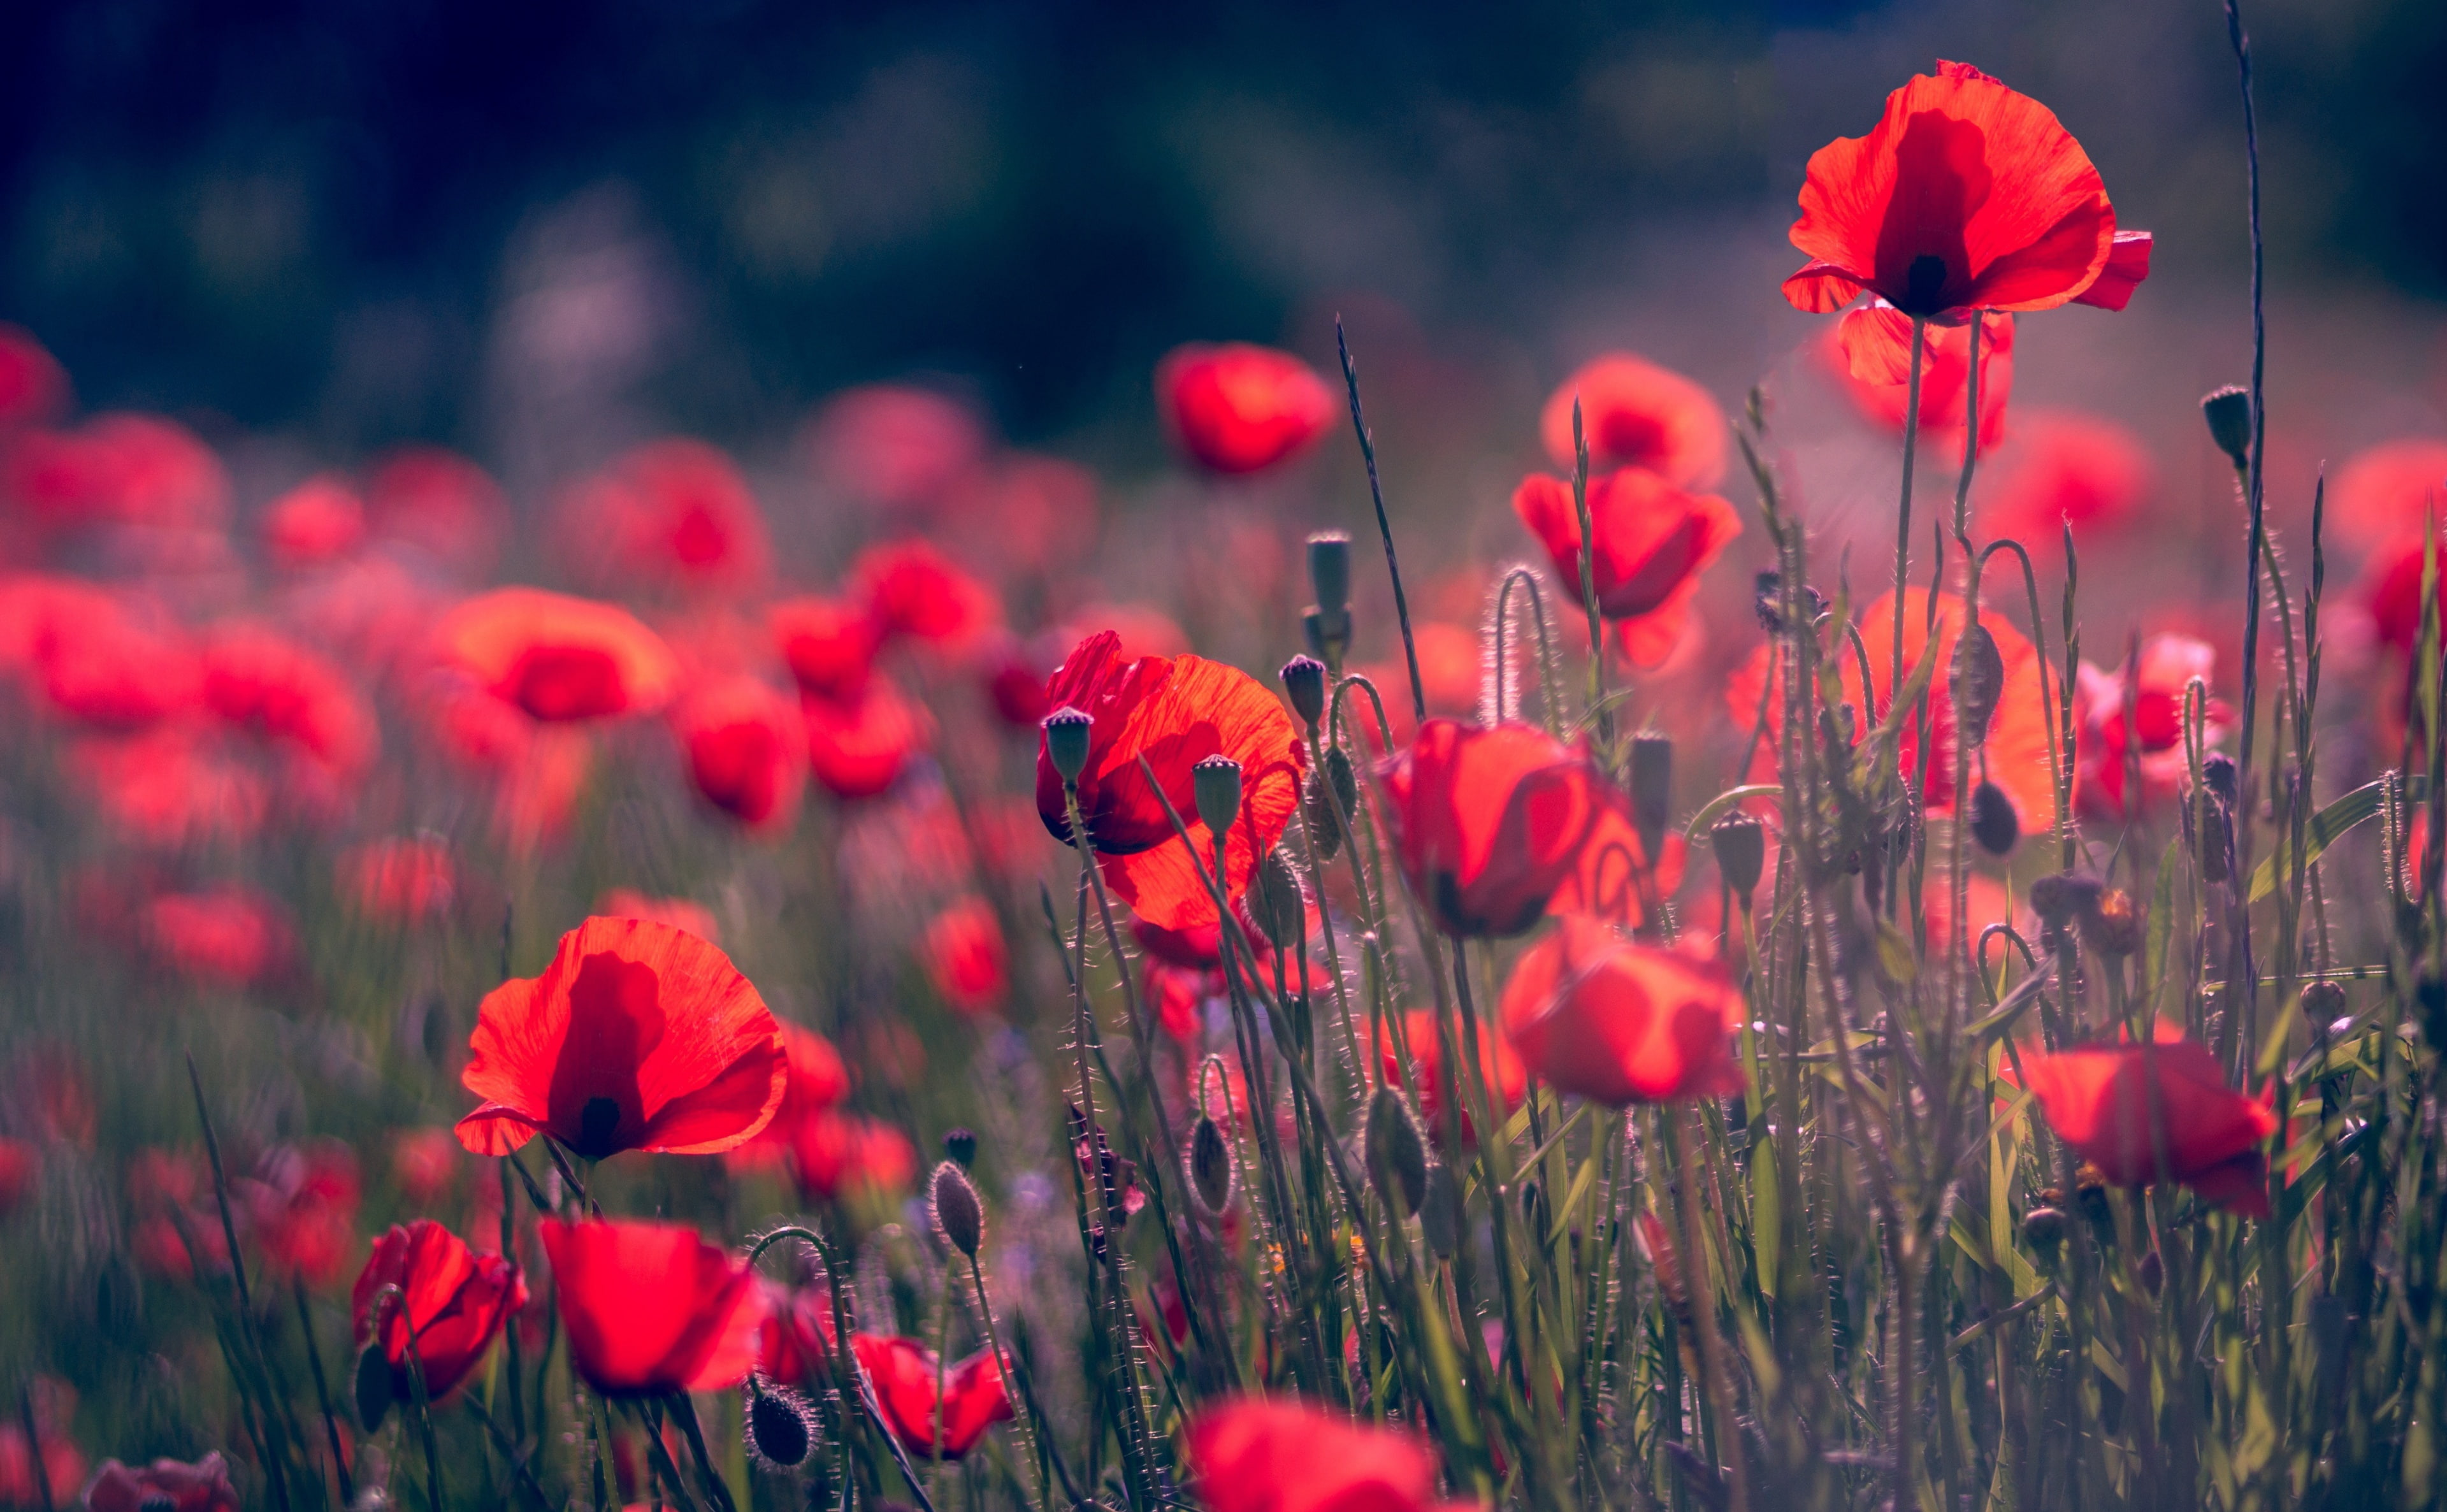 Red Poppies Field, Wild Flowers, Nature, Summer, Plants, Europe